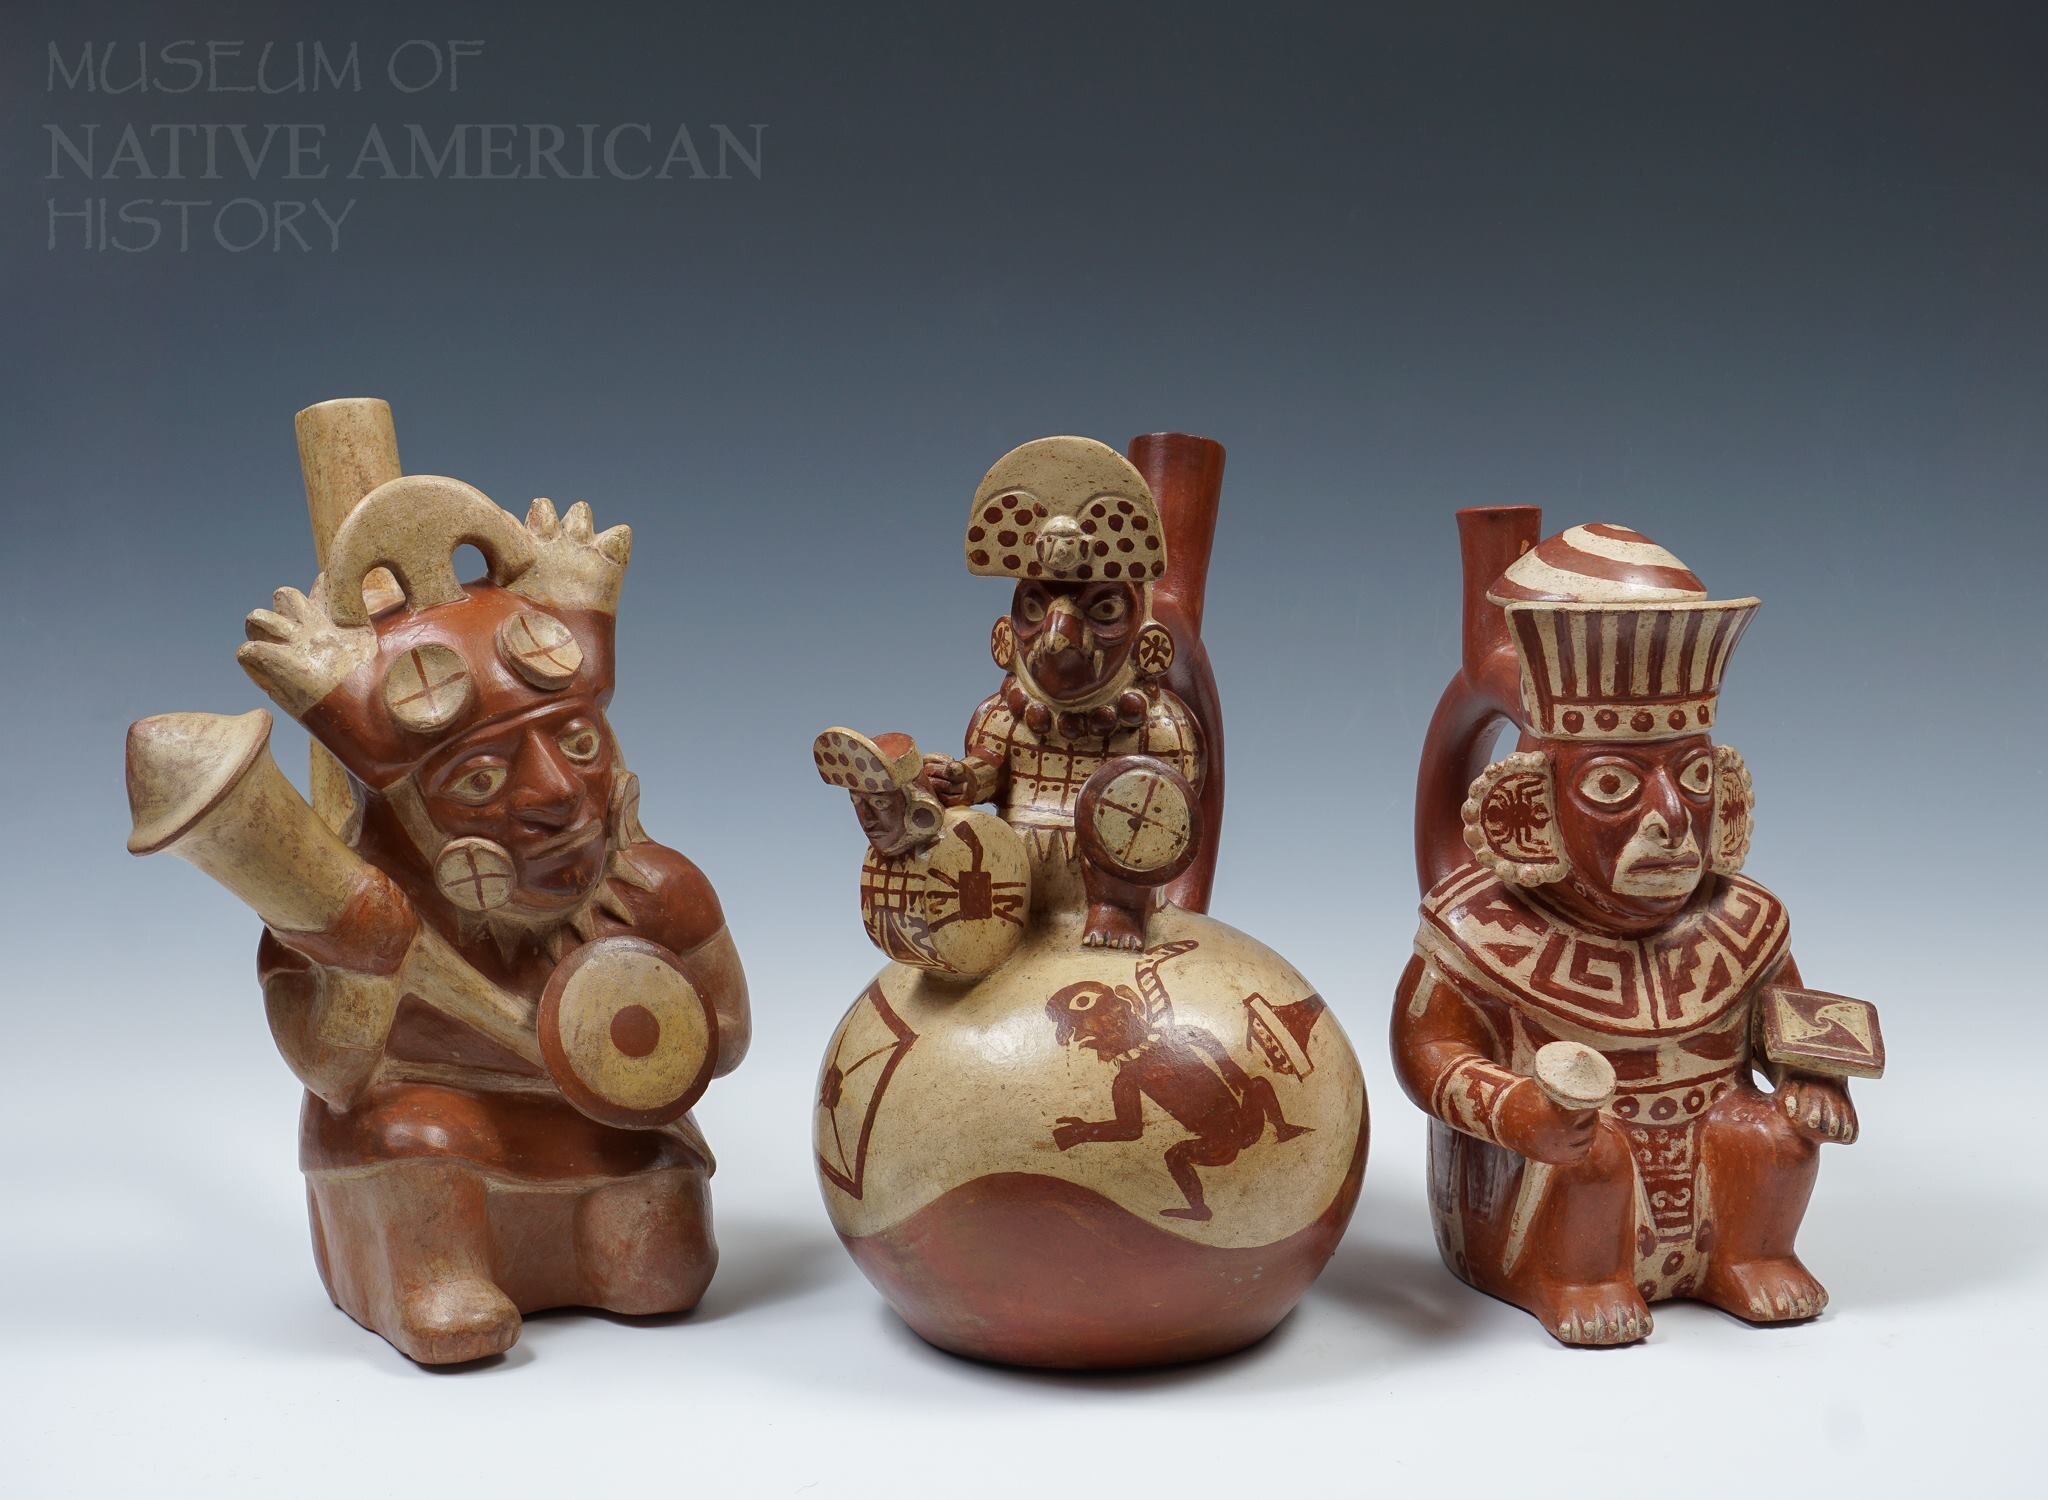 Representations of human figures on ceramic from the